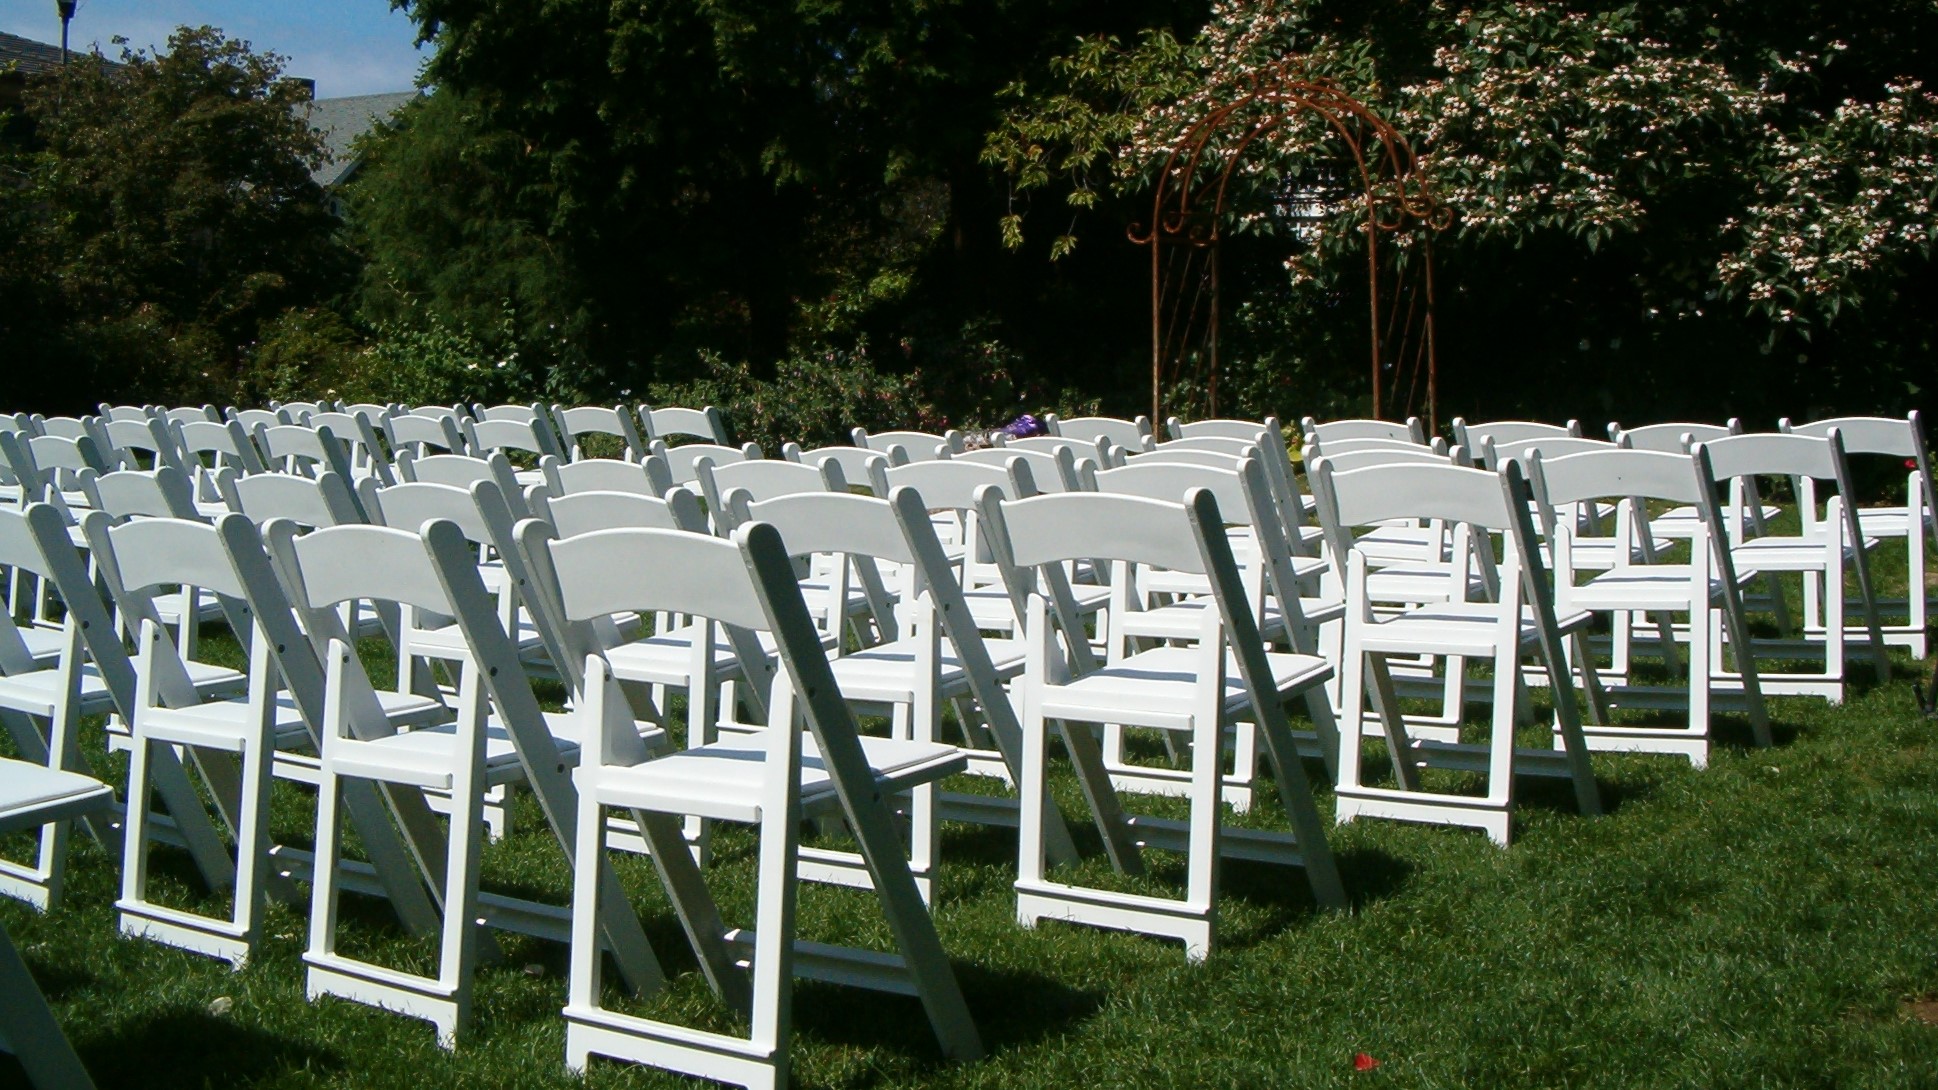 Chairs set up on grass